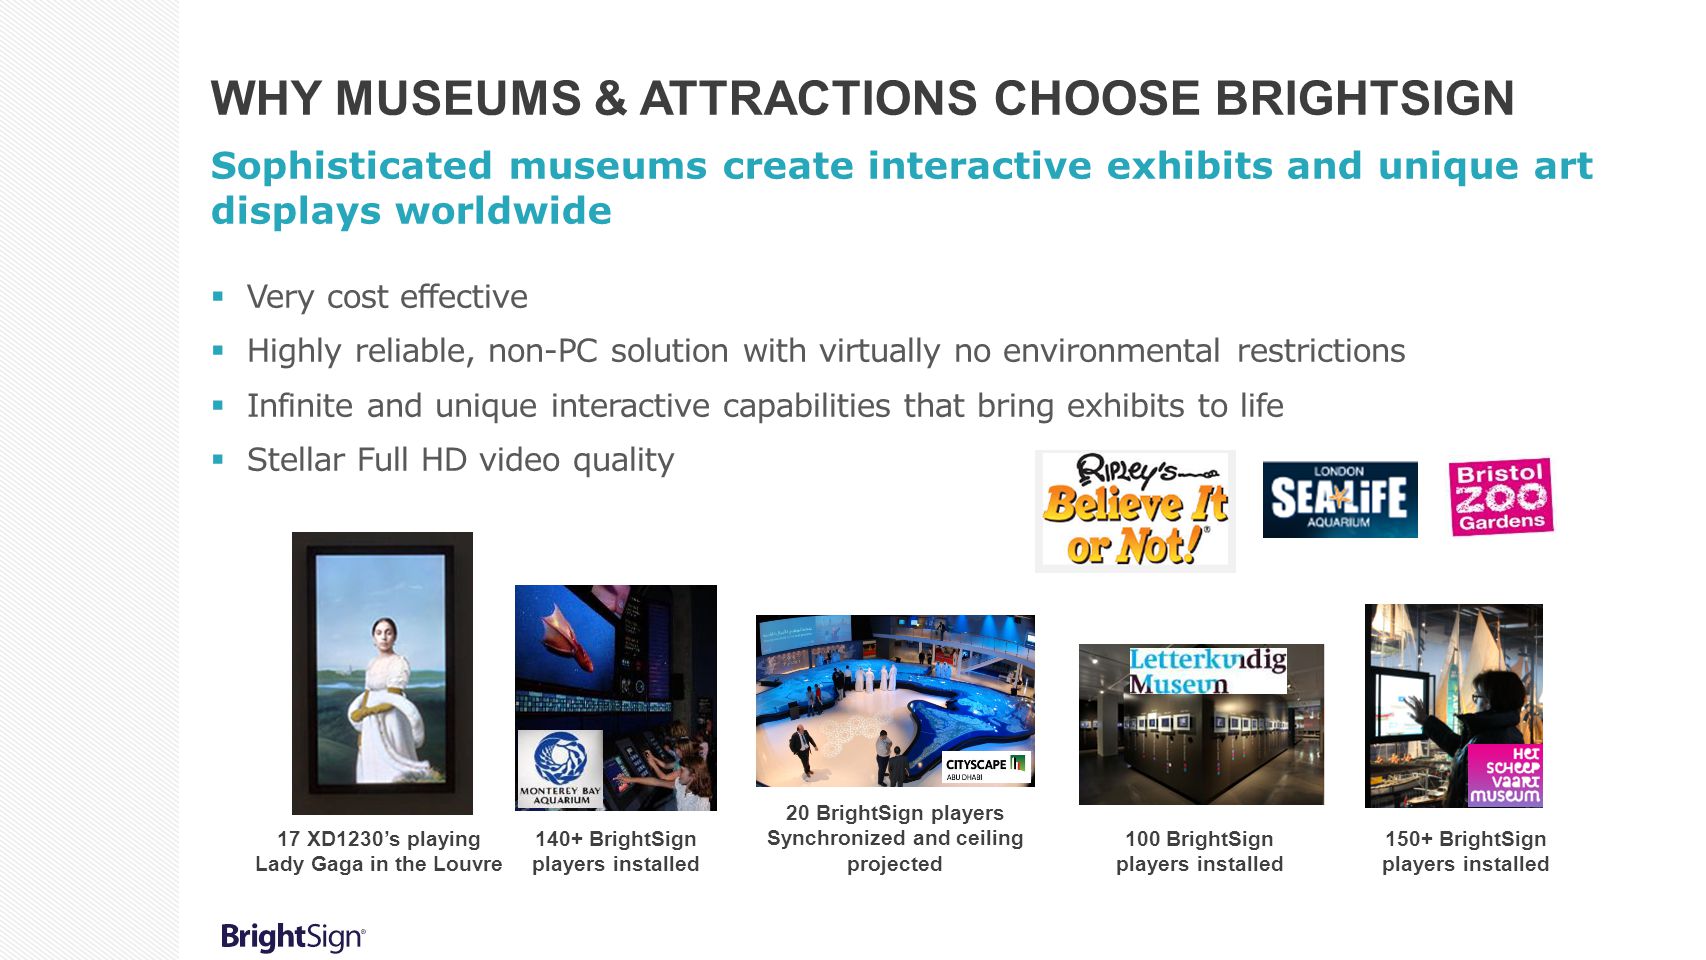 Why Museums & Attractions Choose BrightSign